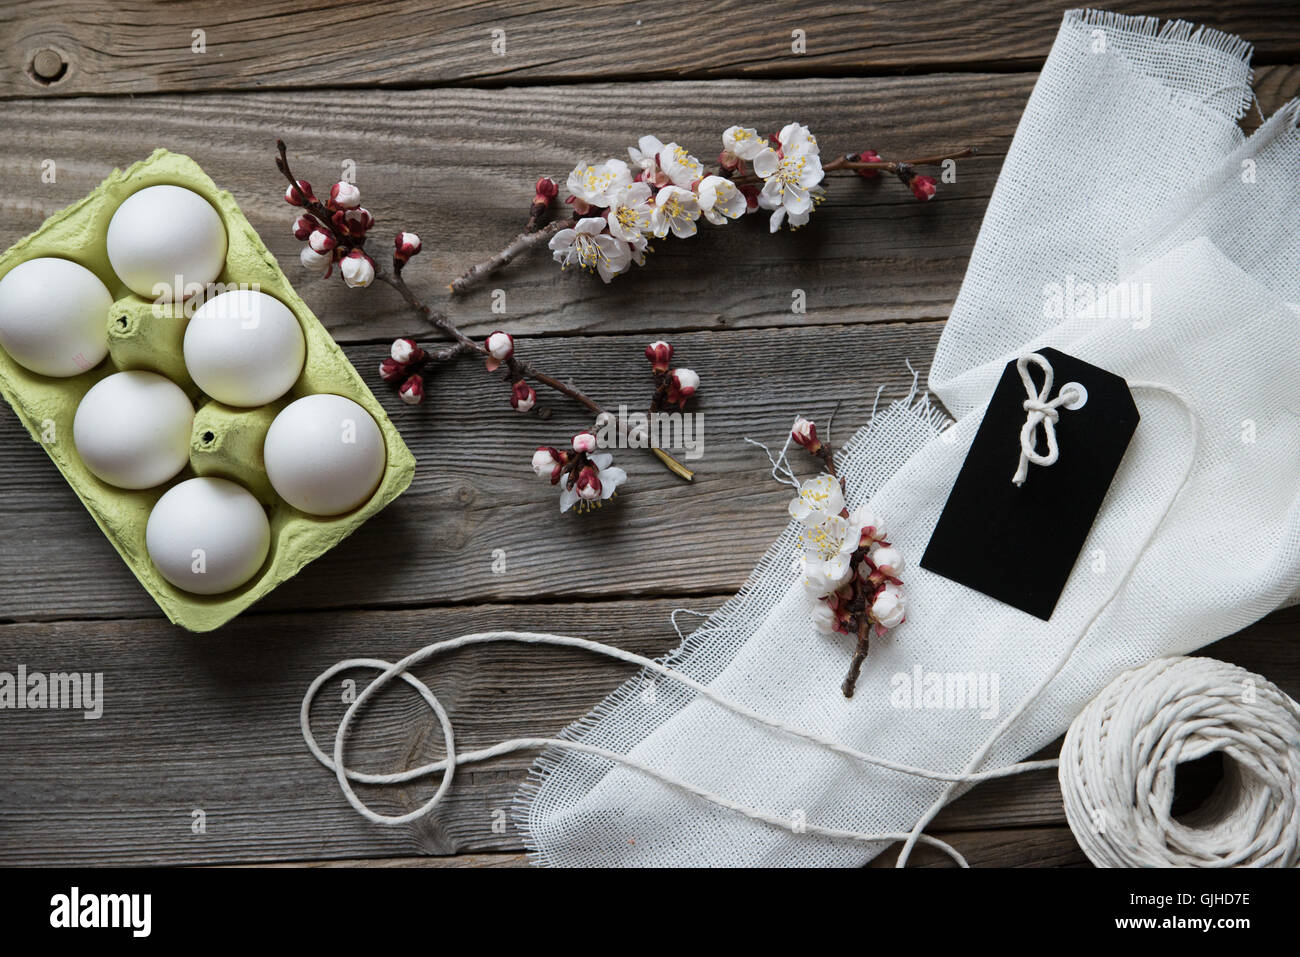 Eggs, cherry blossom, muslin, string and label Stock Photo